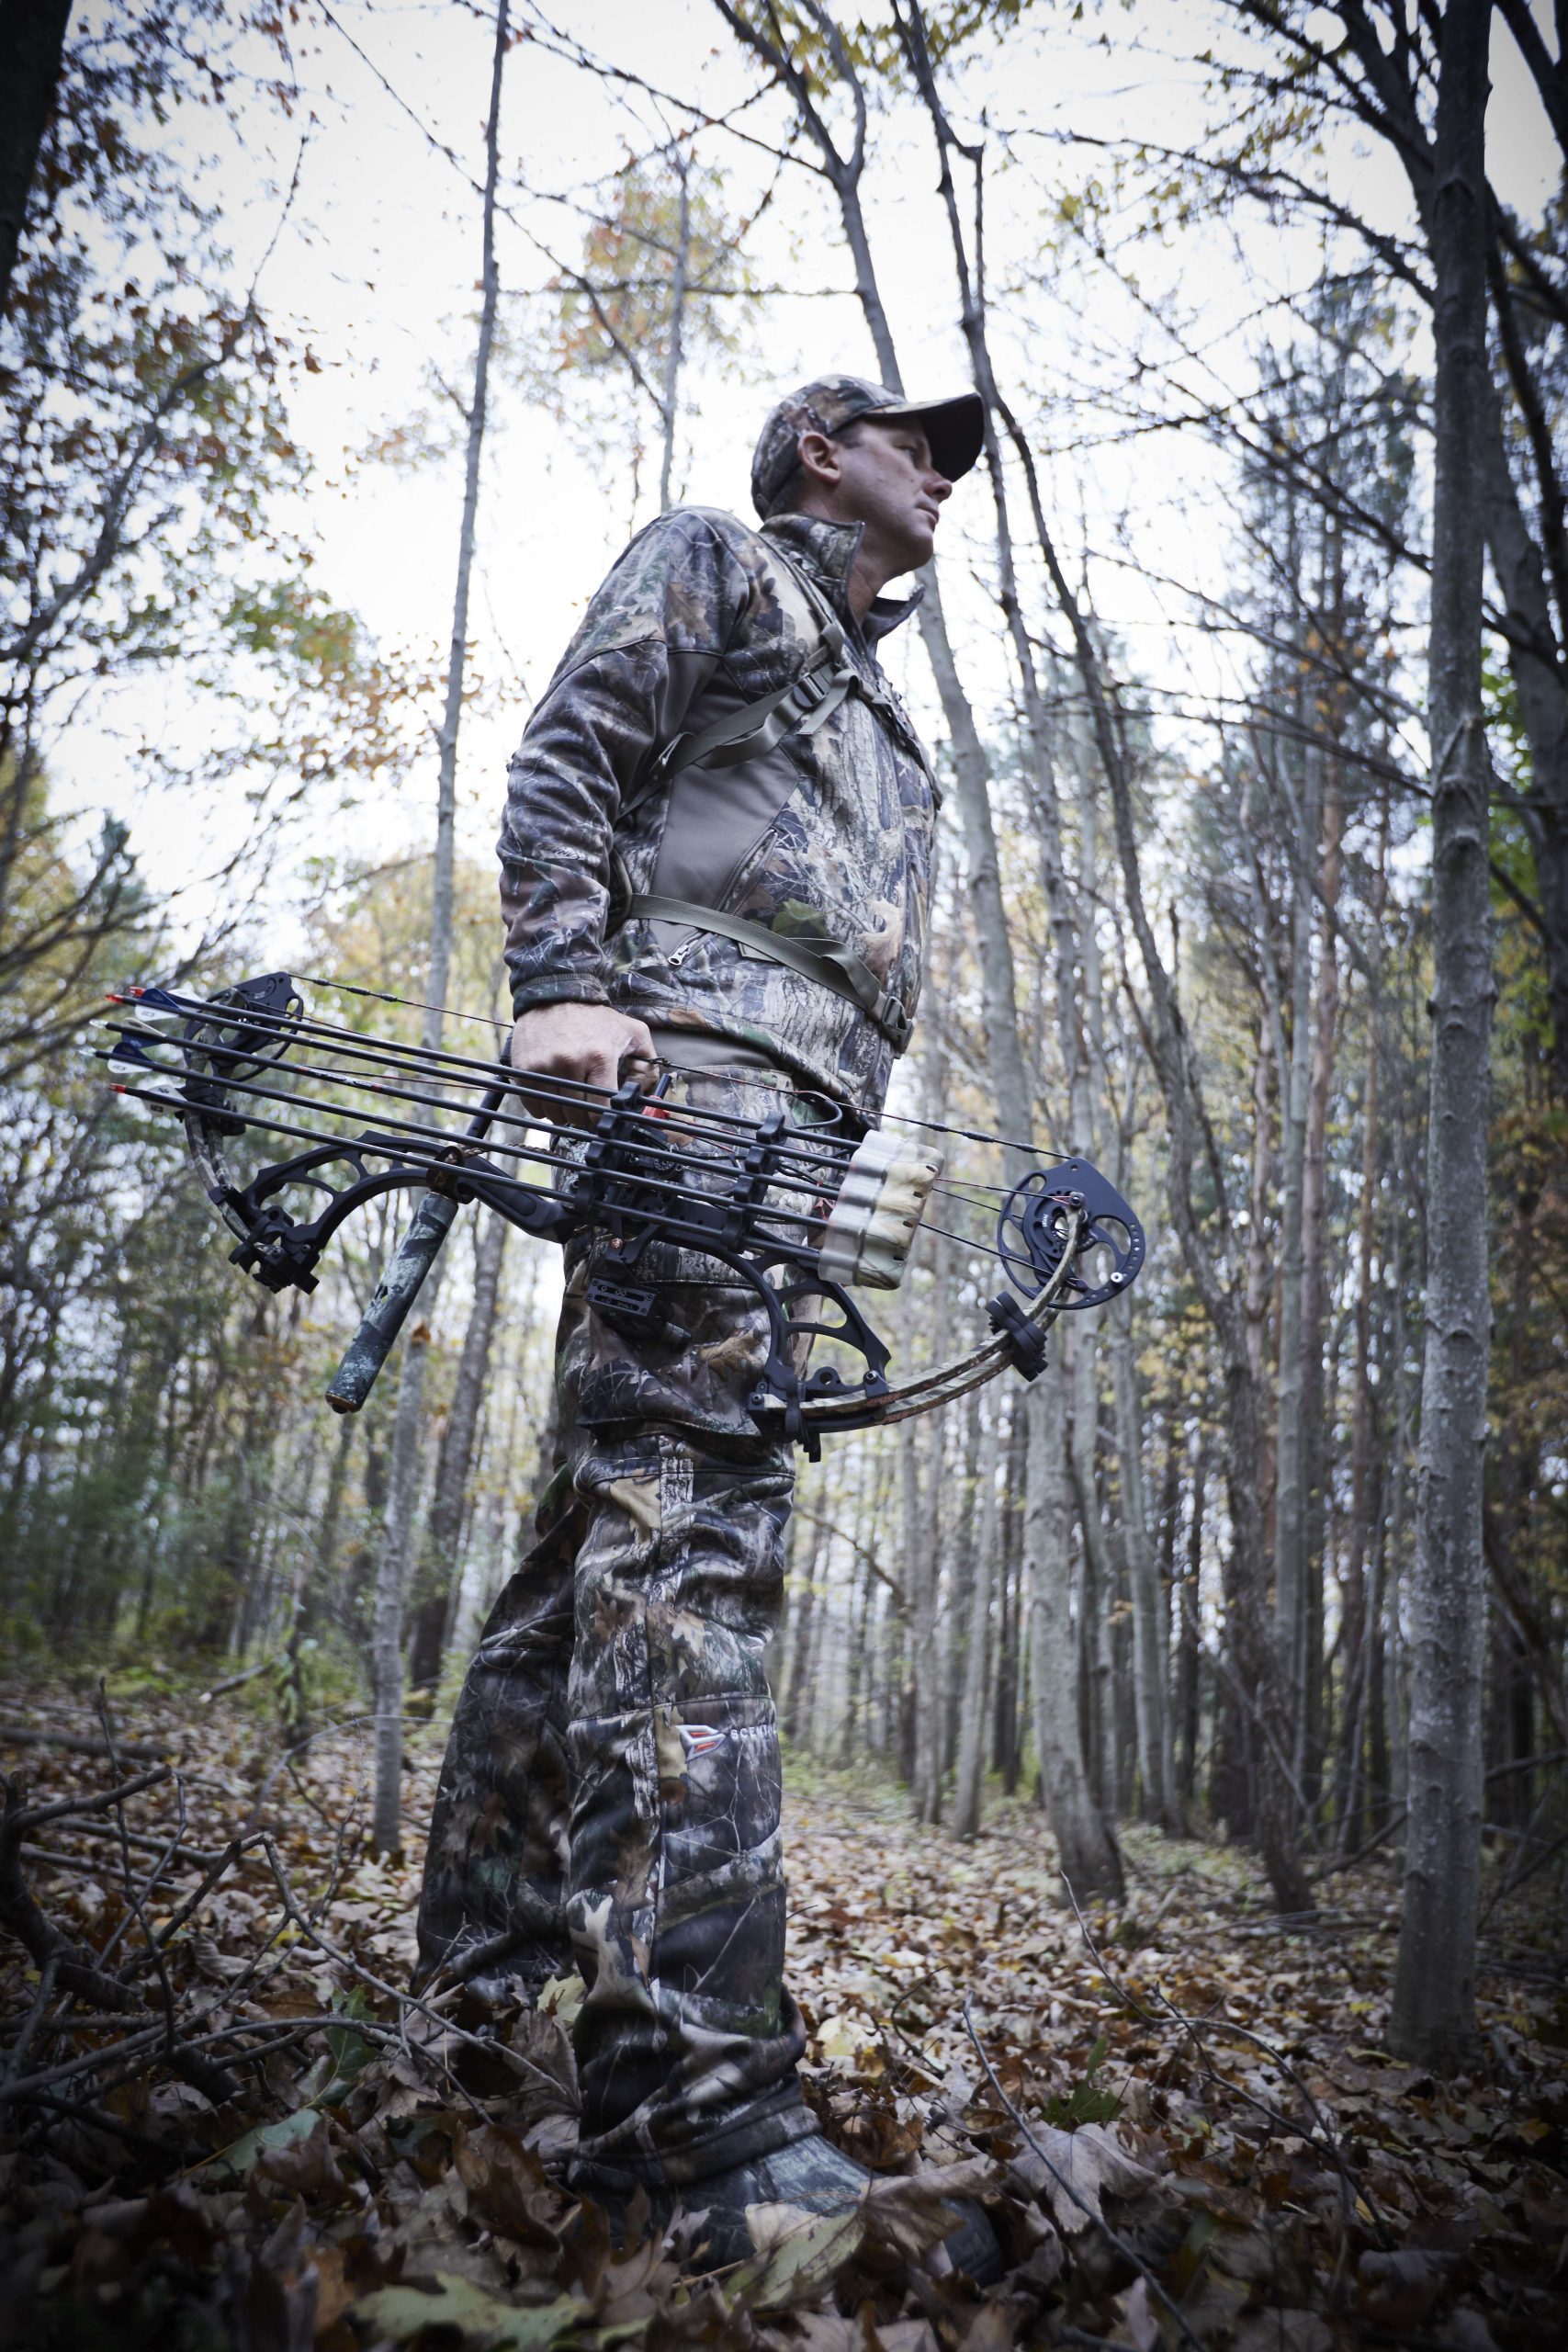 While most fans see Kevin with a rod in his hand, he's just as comfortable with a bow. He's truly an all-around outdoorsman, with a deep love for hunting that matches his love of fishing.